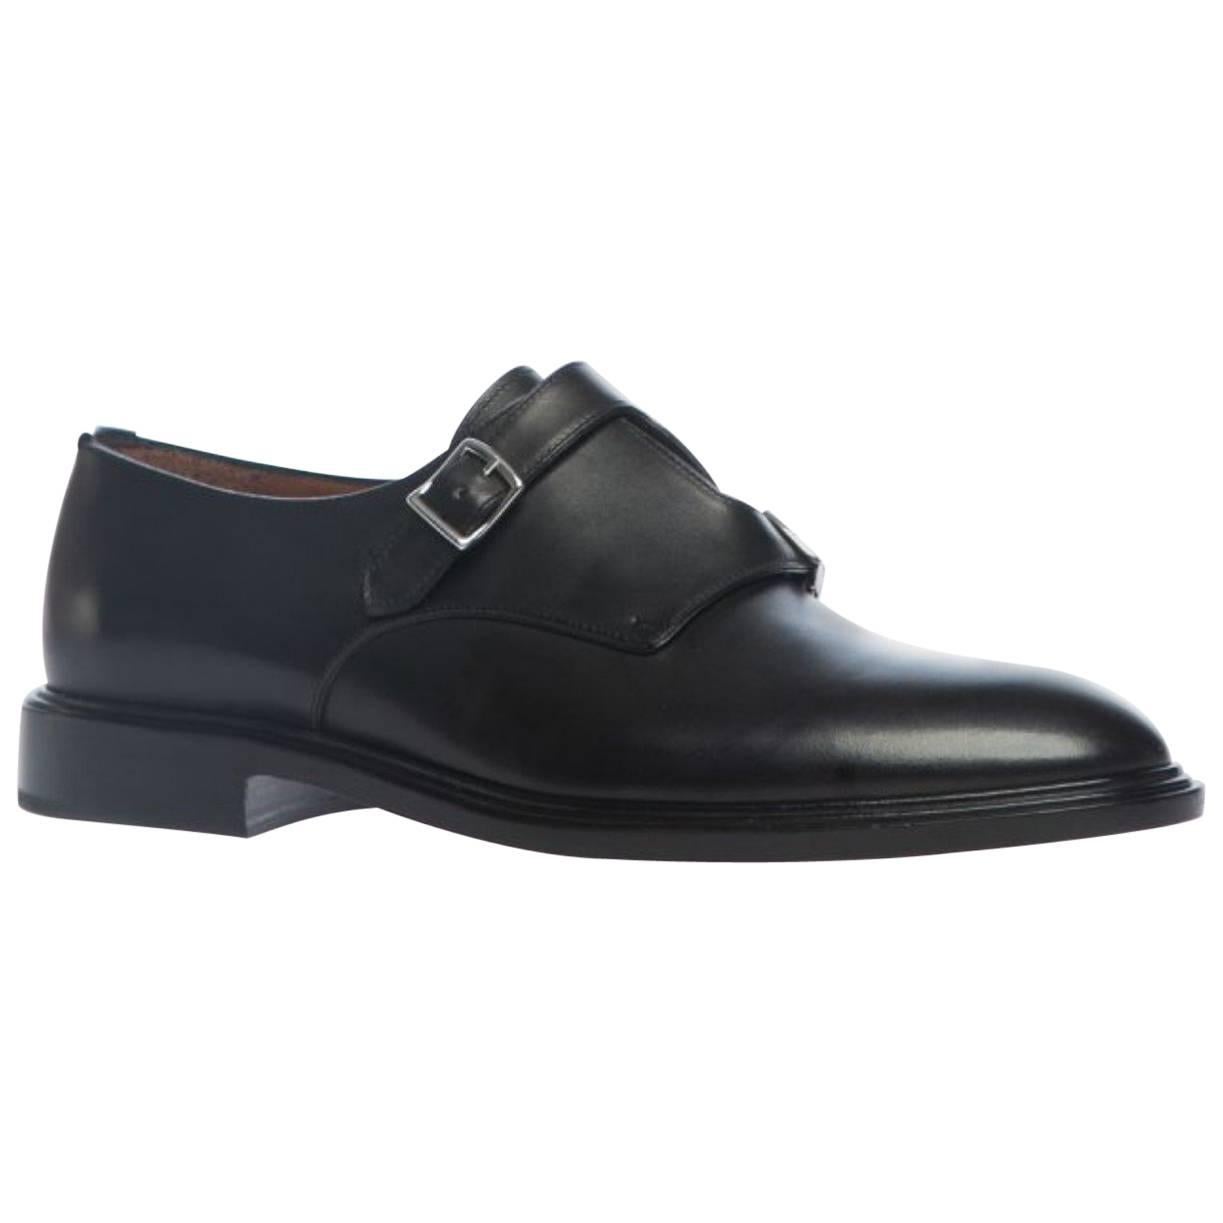 Givenchy Double Buckle Monk Strap Shoes (Size - 43) For Sale